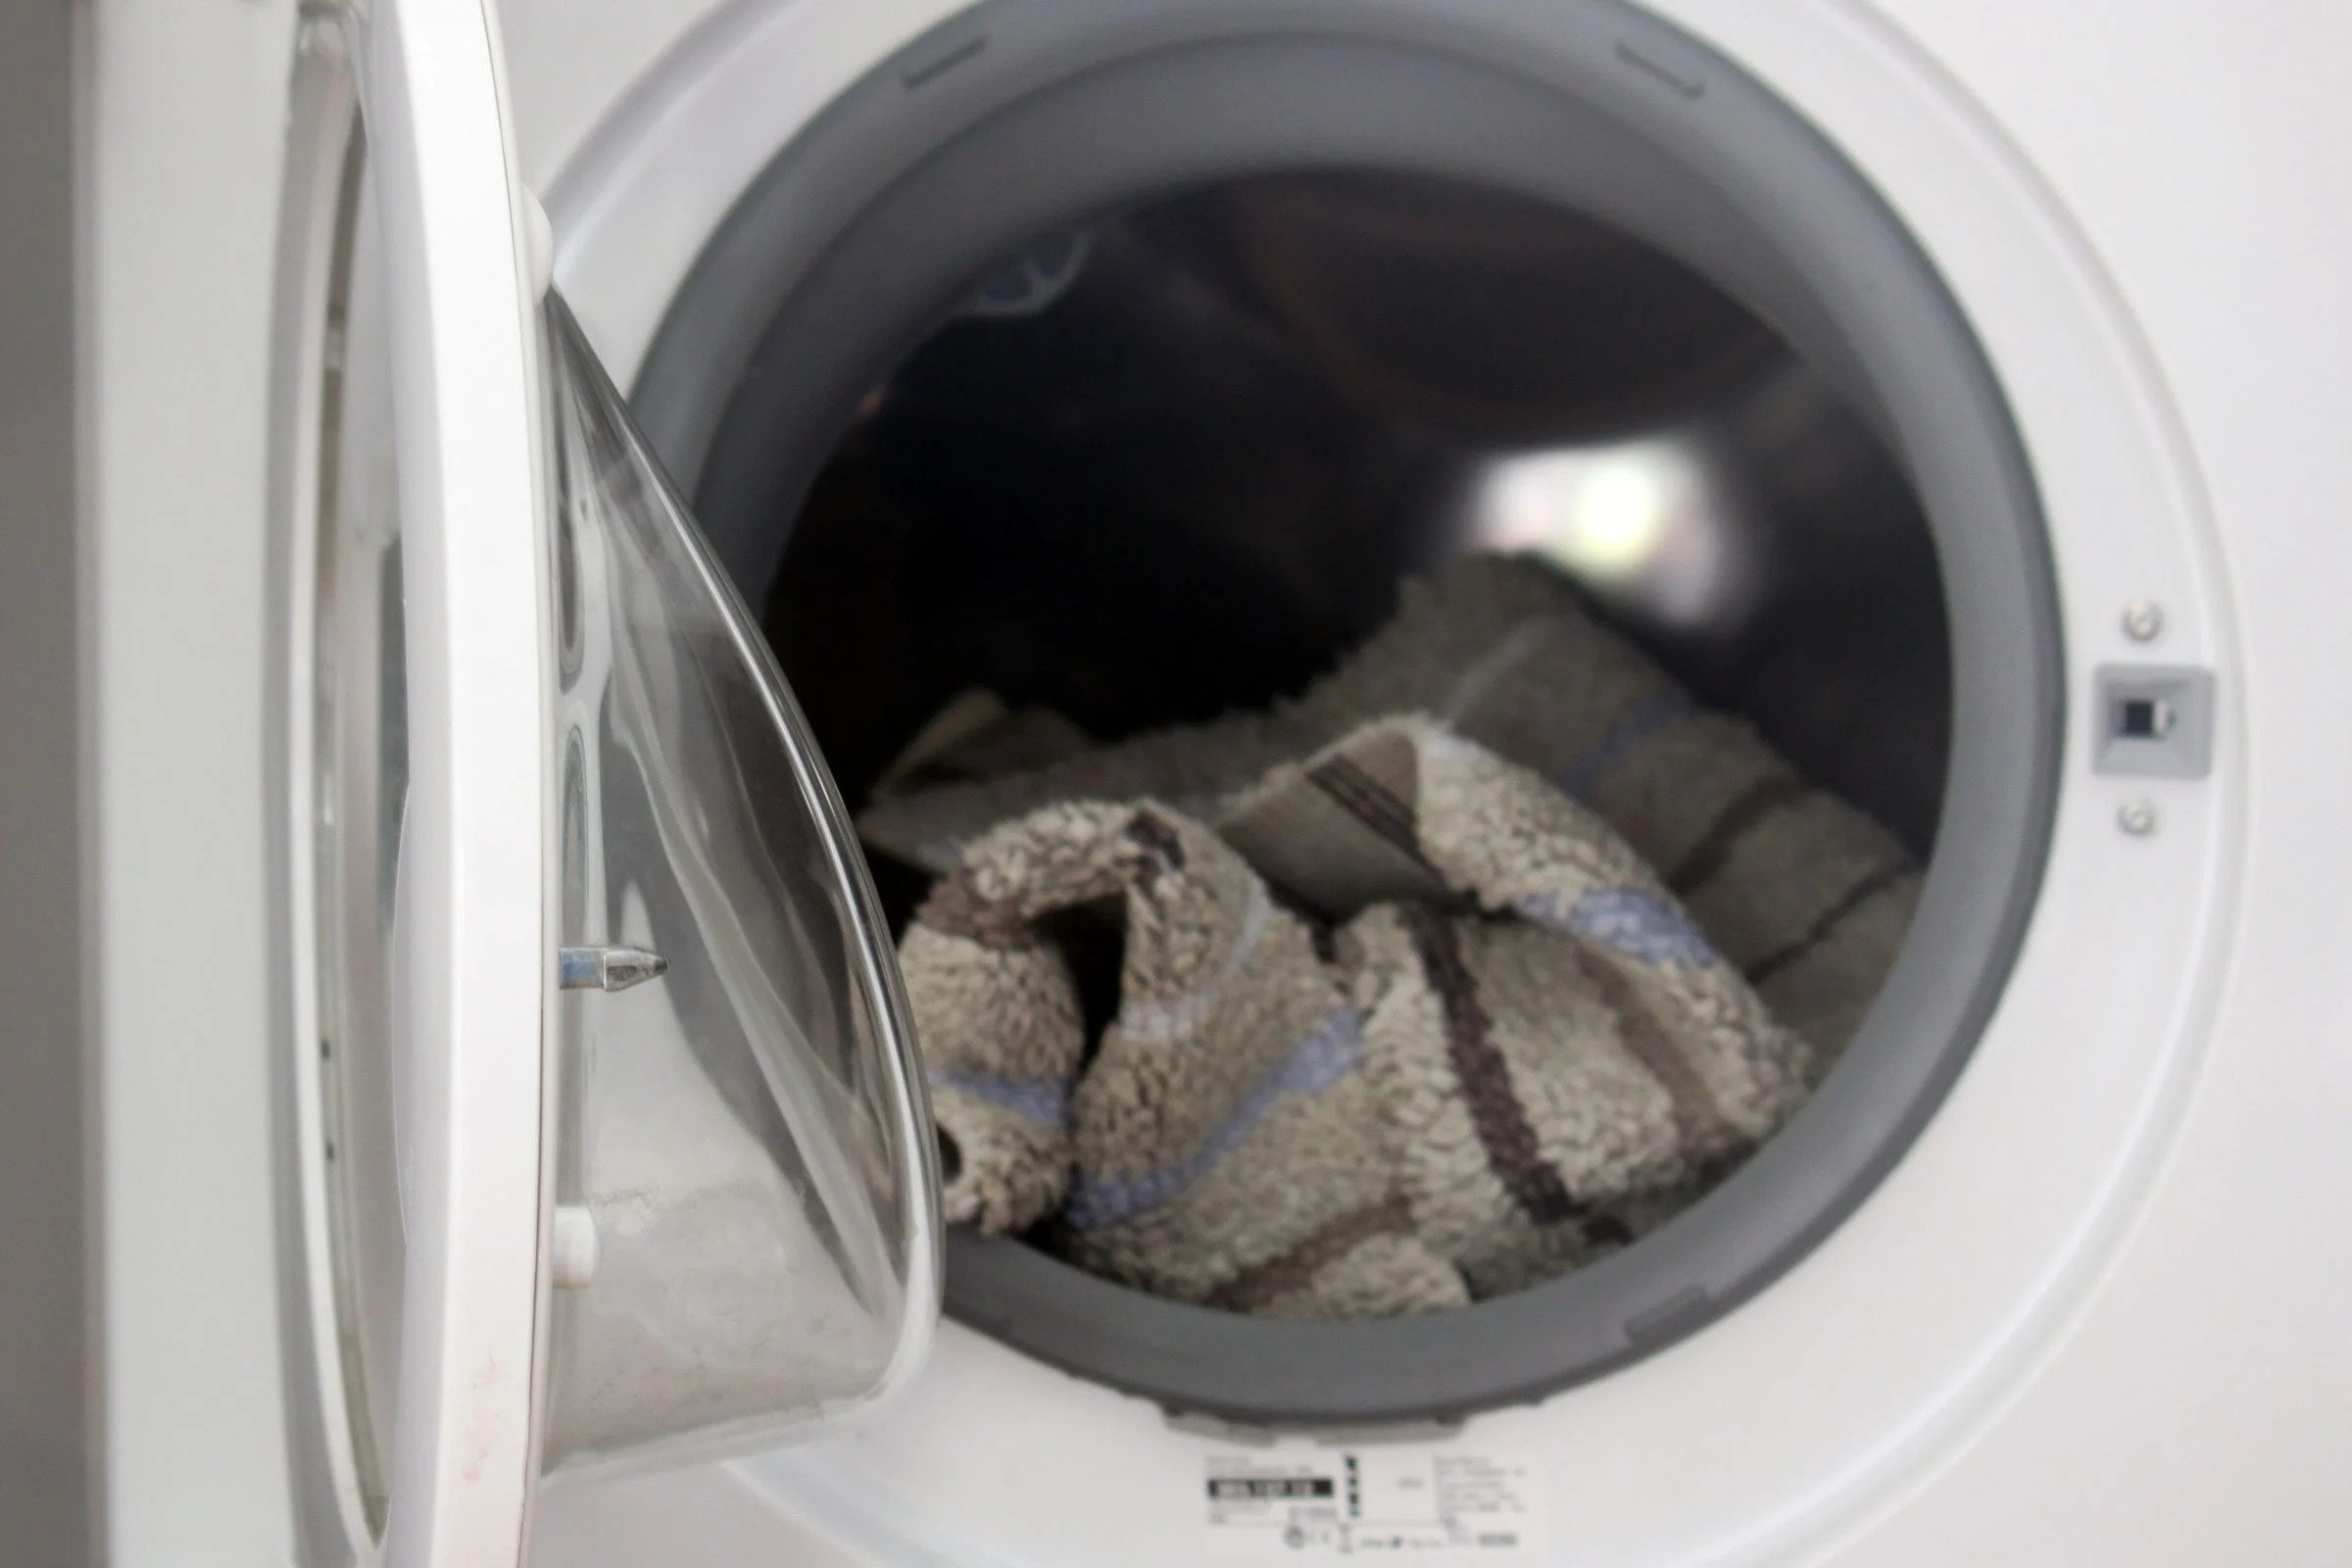 How To Clean Bathroom Rugs In Washing Machine